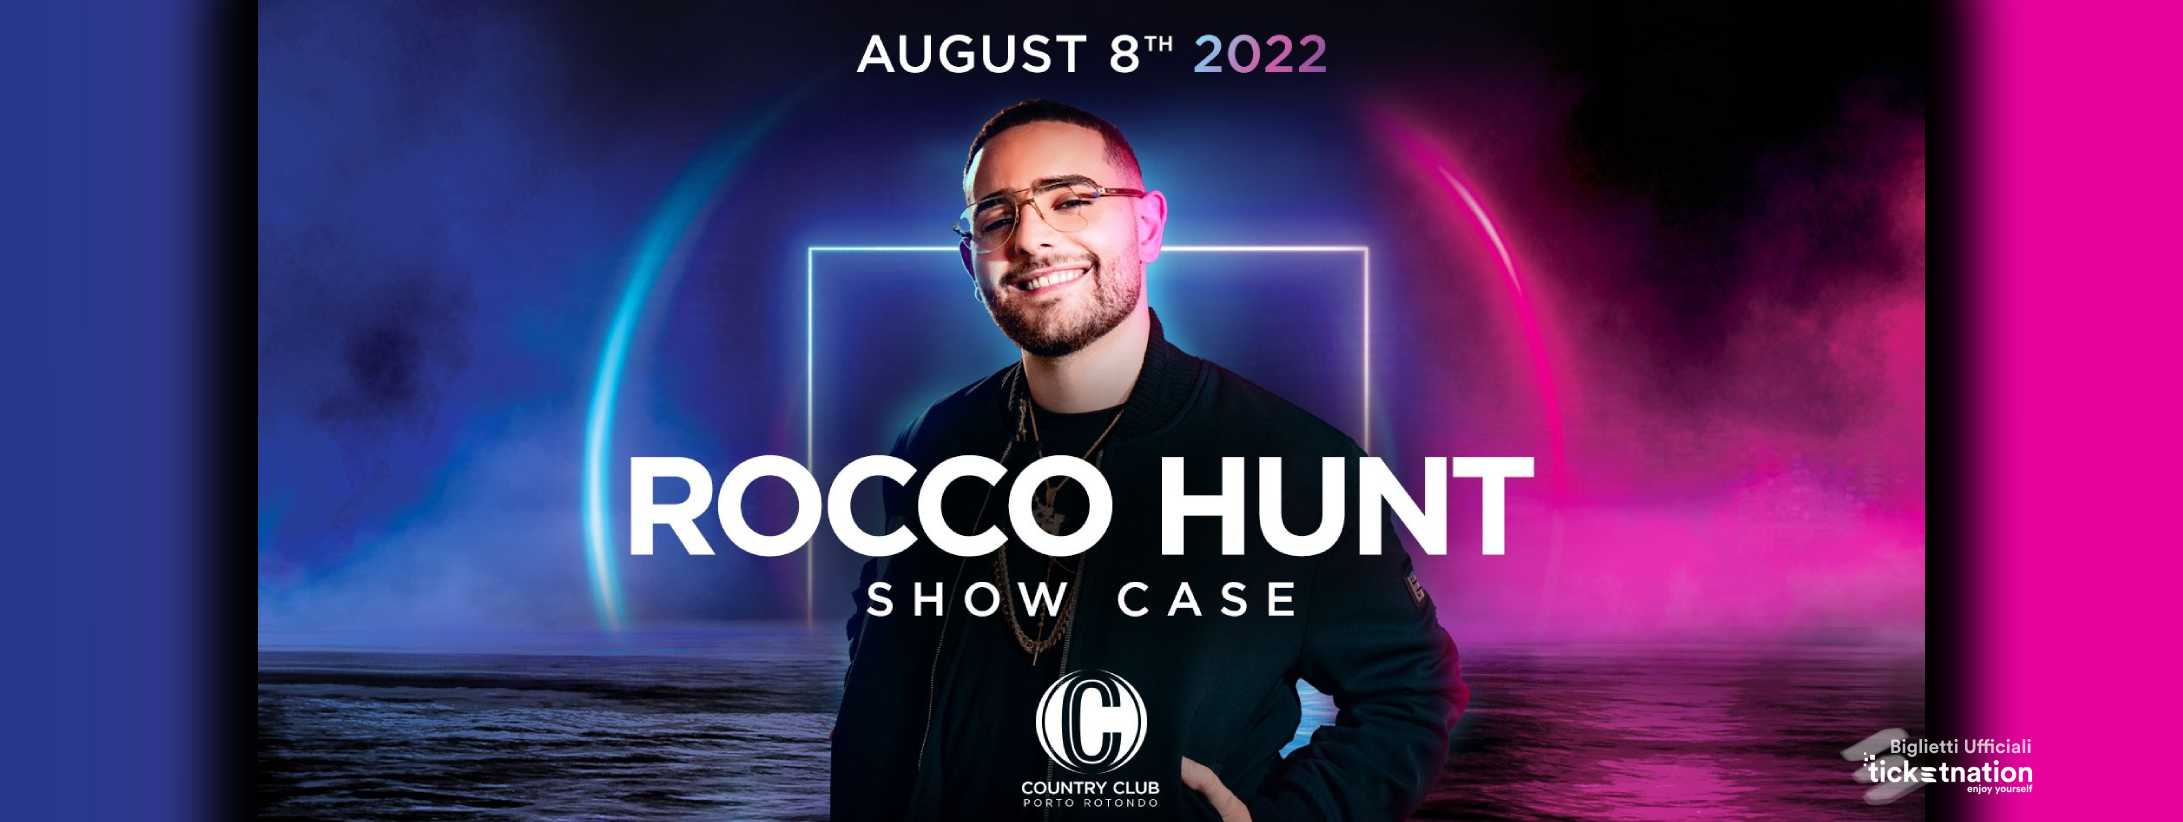 Rocco Hunt @ COuntry ago 2022